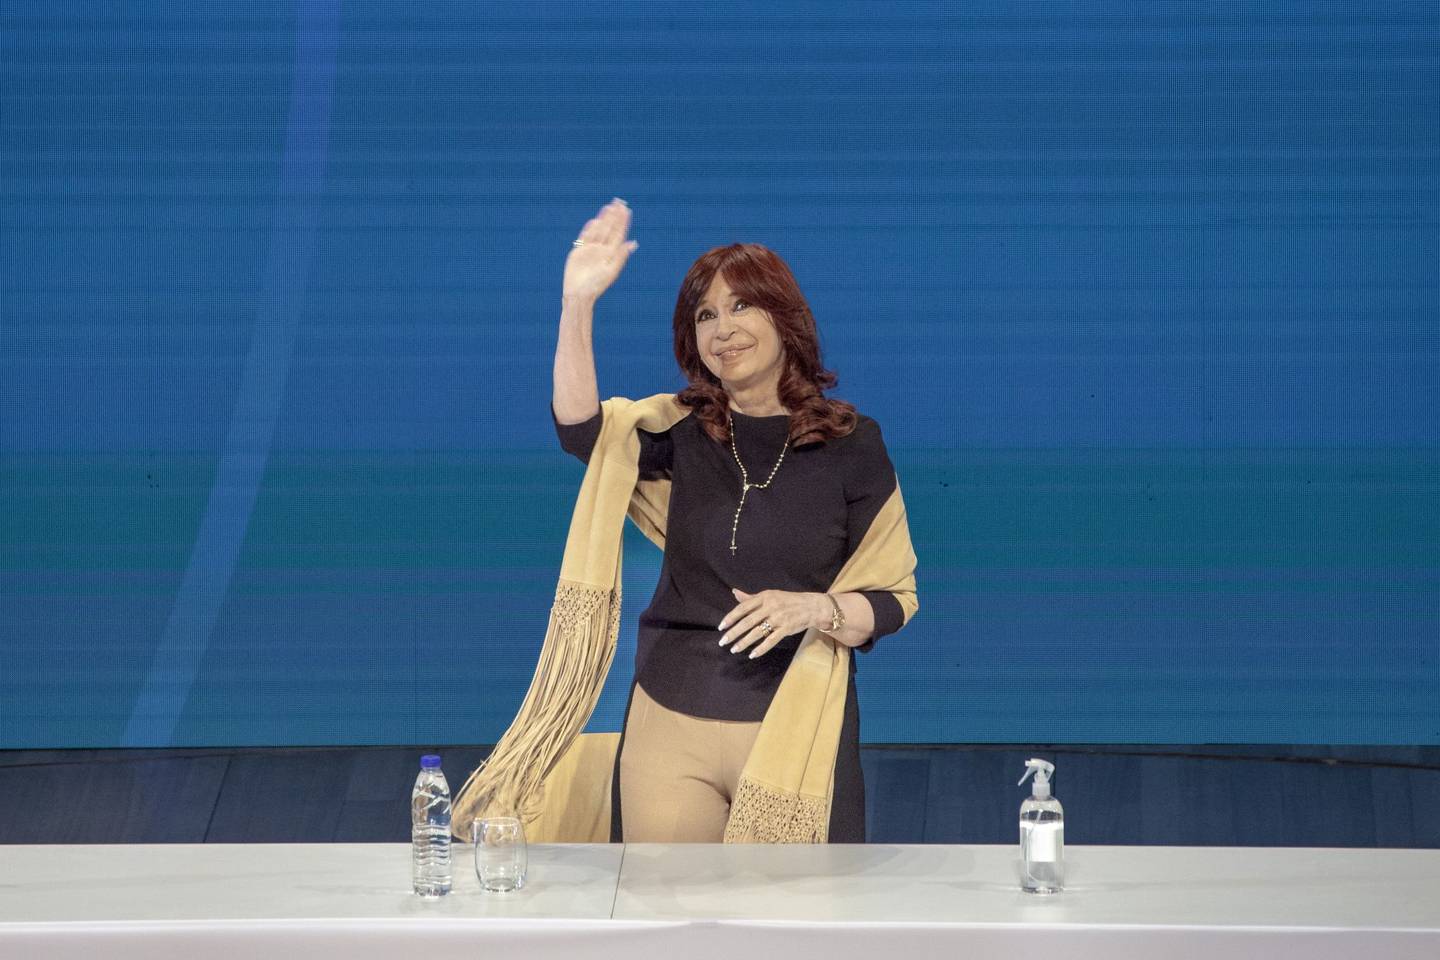 Cristina Fernandez de Kirchner, Argentina's vice president, waves during the Euro Latin American Parliamentary Assembly (EuroLat) in Buenos Aires, Argentina, on Wednesday, April 13, 2022. Kirchner delivered opening remarks at 14th EuroLat plenary session, where members discussed the follow up to the Covid-19 pandemic in Latin America and the Caribbean.